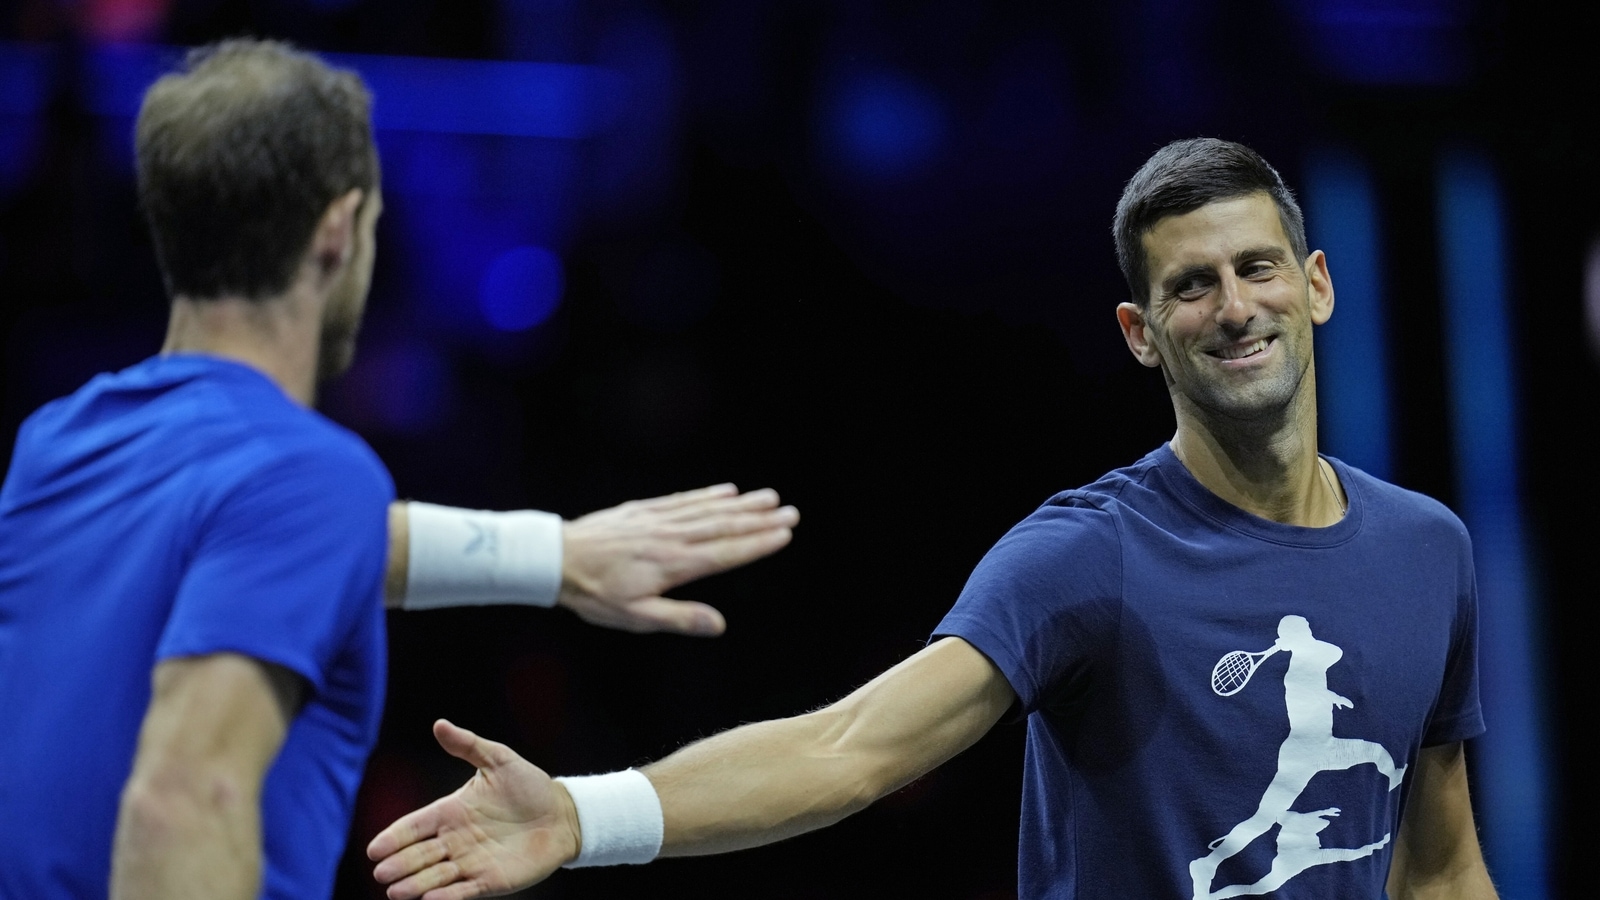 Laver Cup 2022 Day 3 Schedule, order of play - When do Novak and Murray play? Tennis News